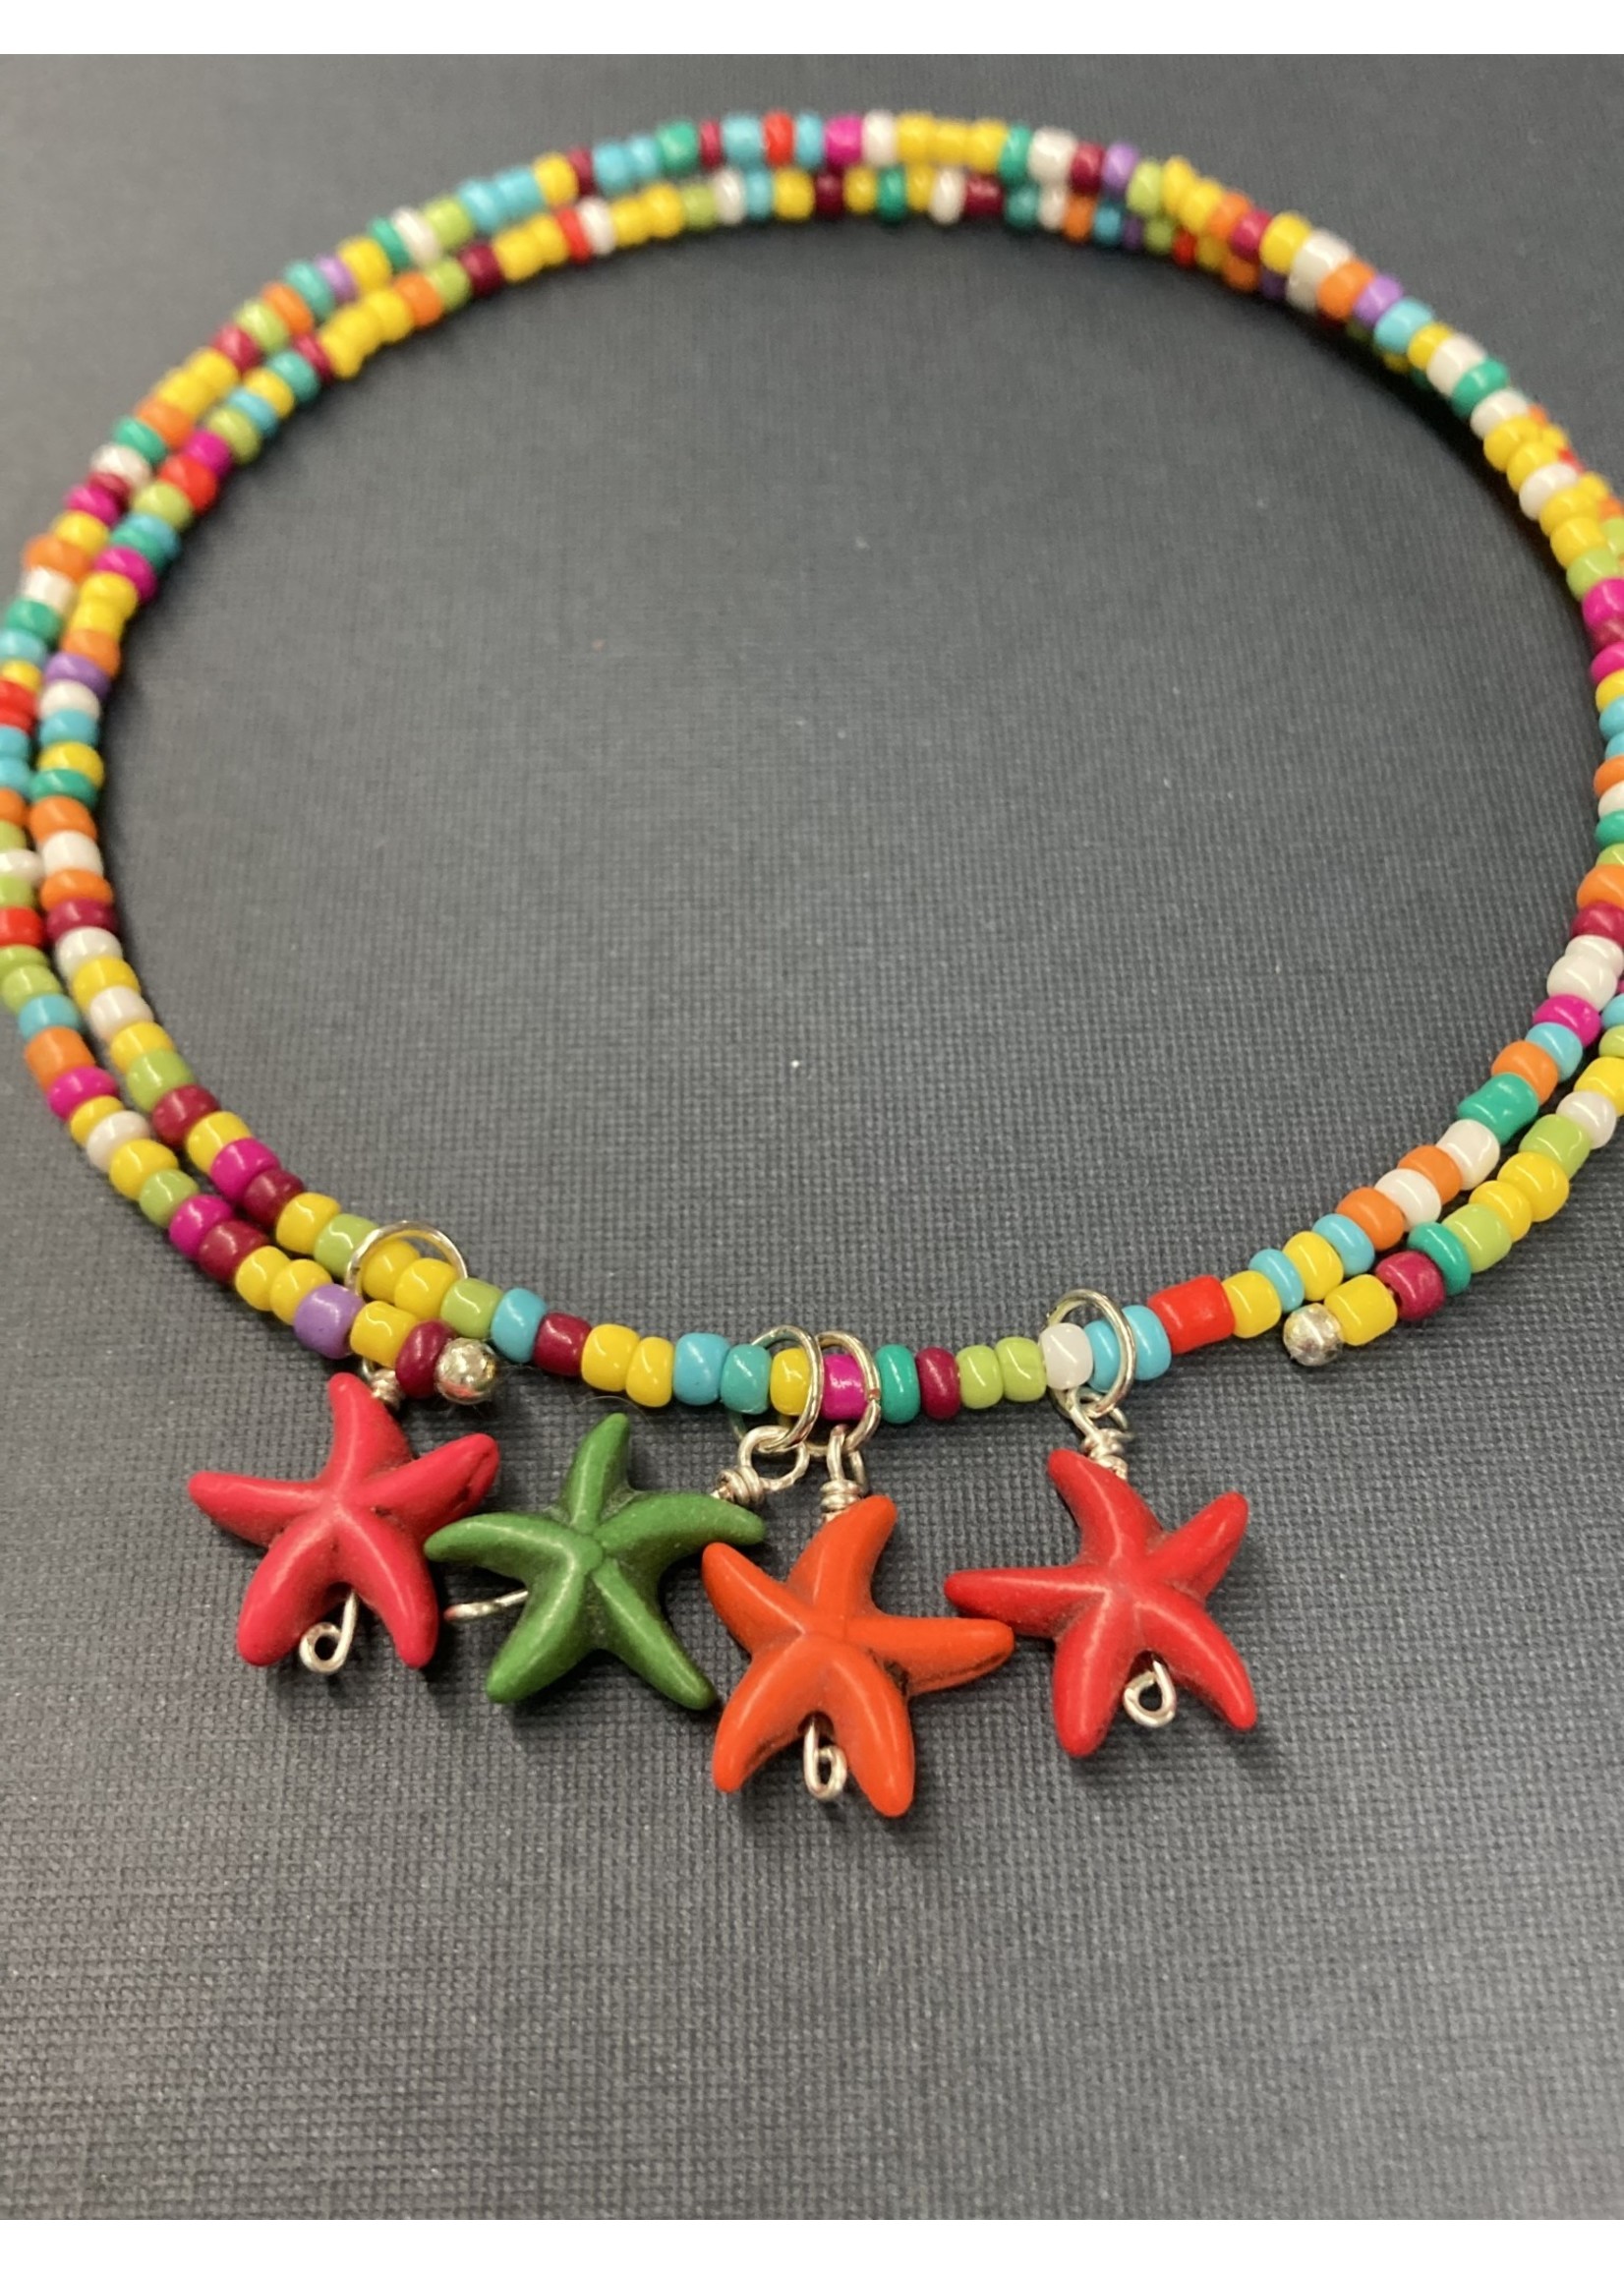 Our Twisted Dahlia Ch006 Multi Color Beads with Starfish Charm Choker